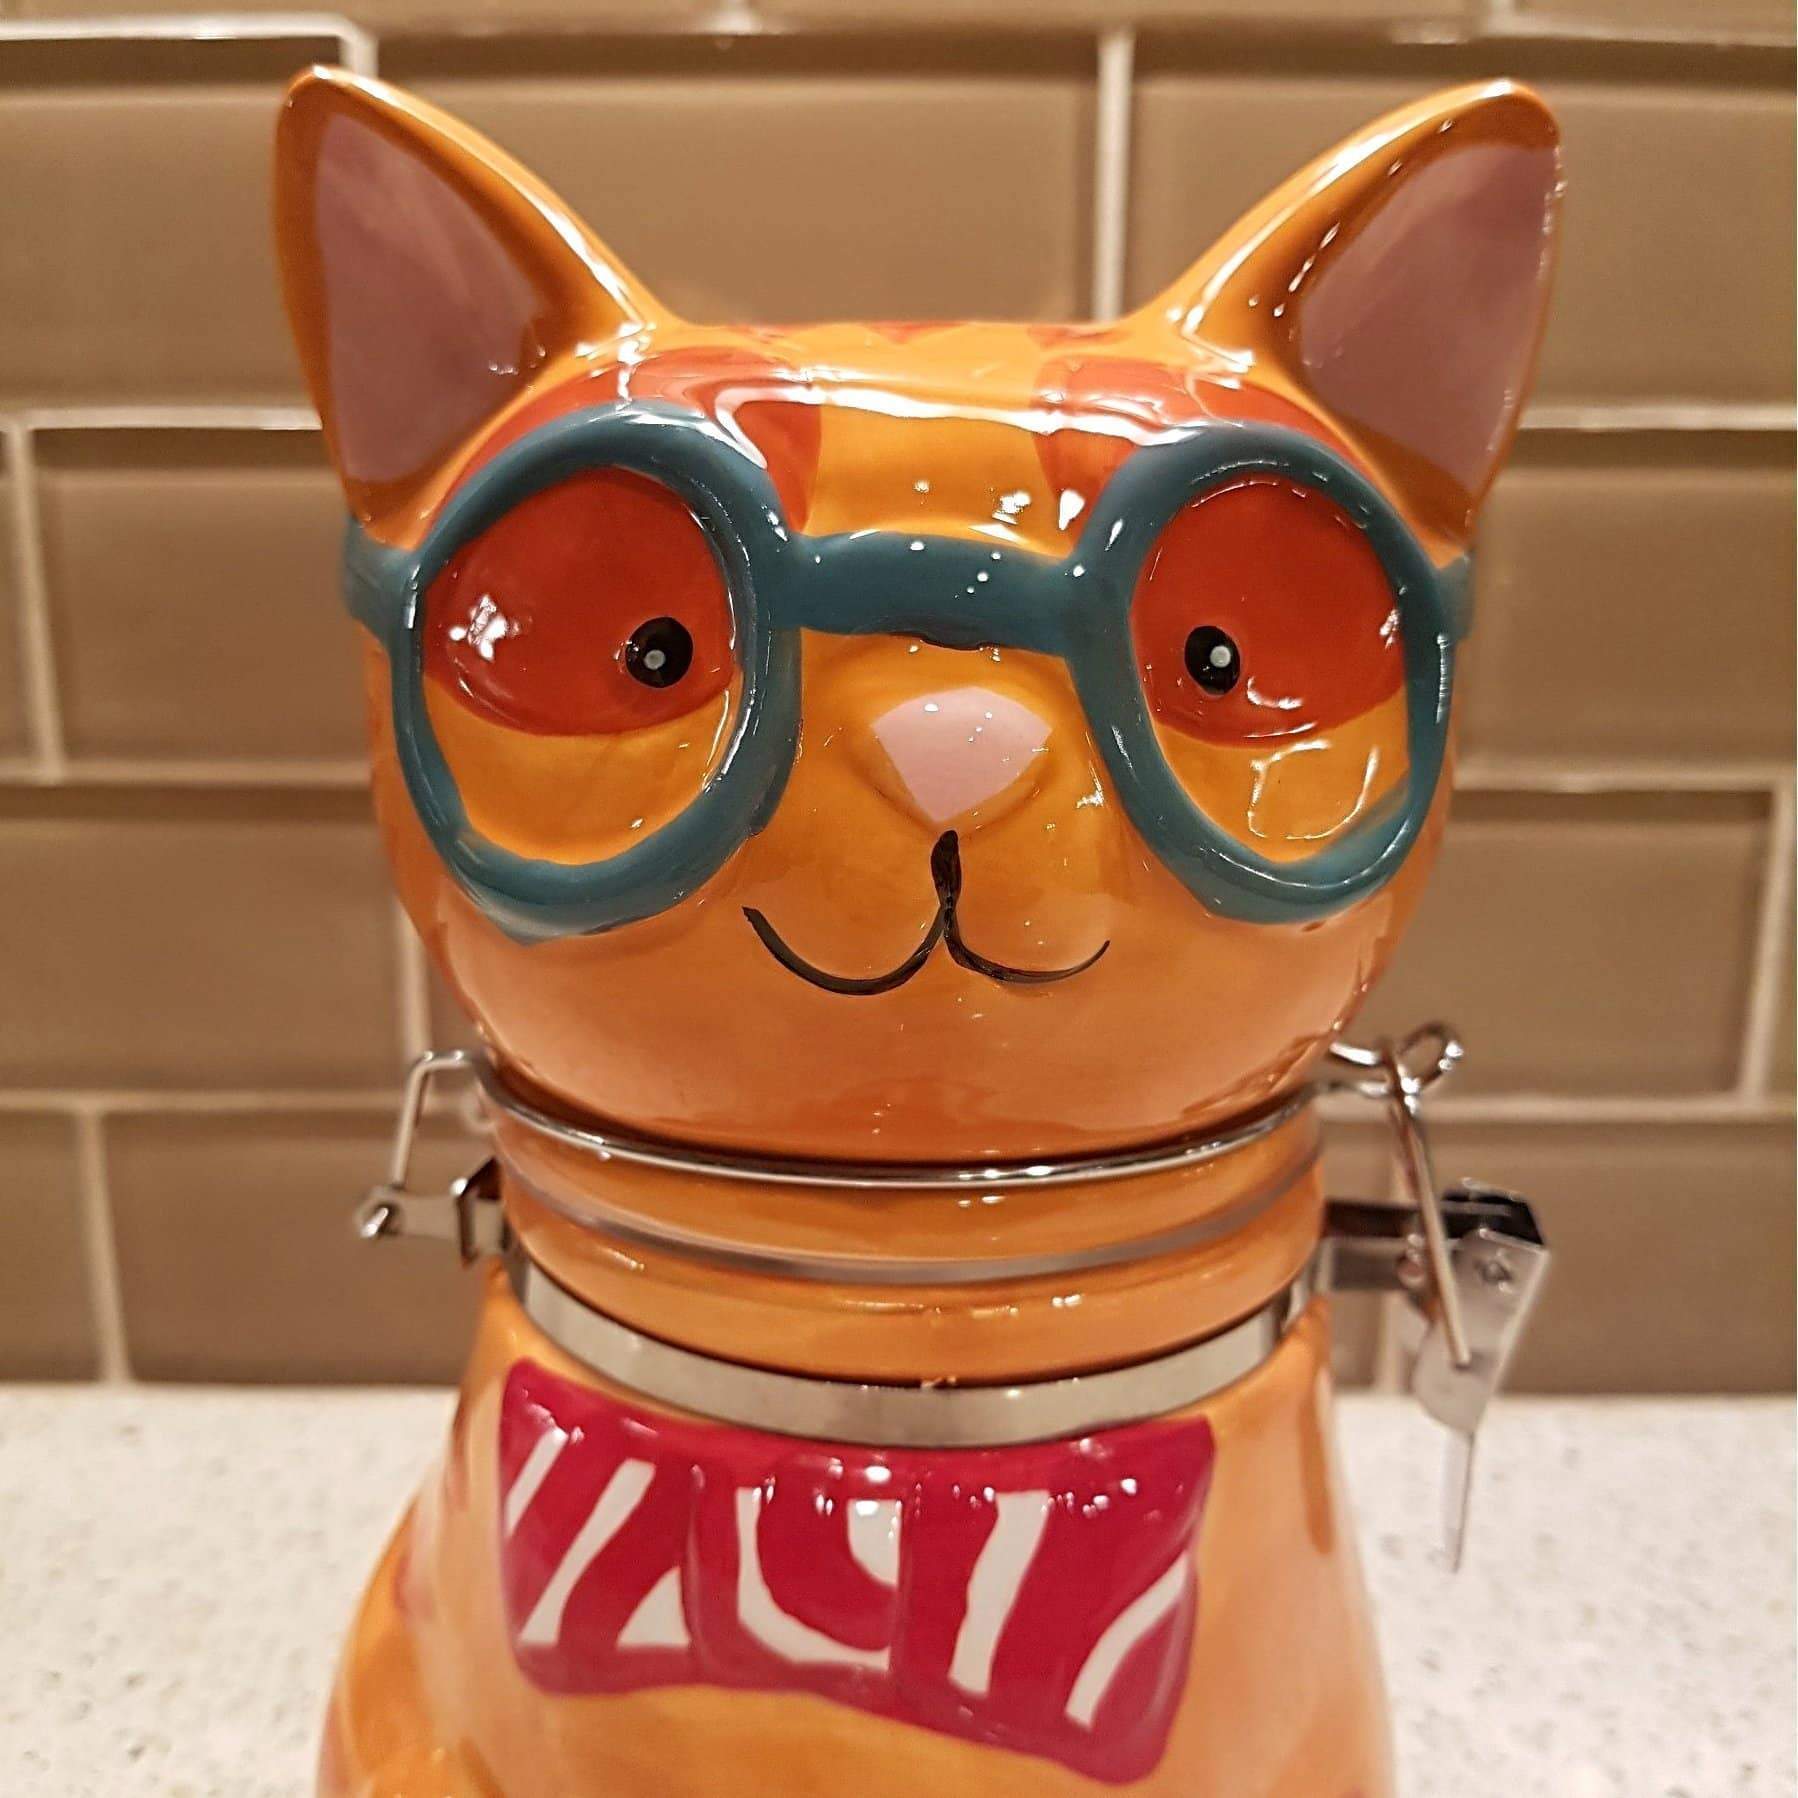 Funny Cat Gifts for Cat Lovers, Cat Shaped Cookie Jar